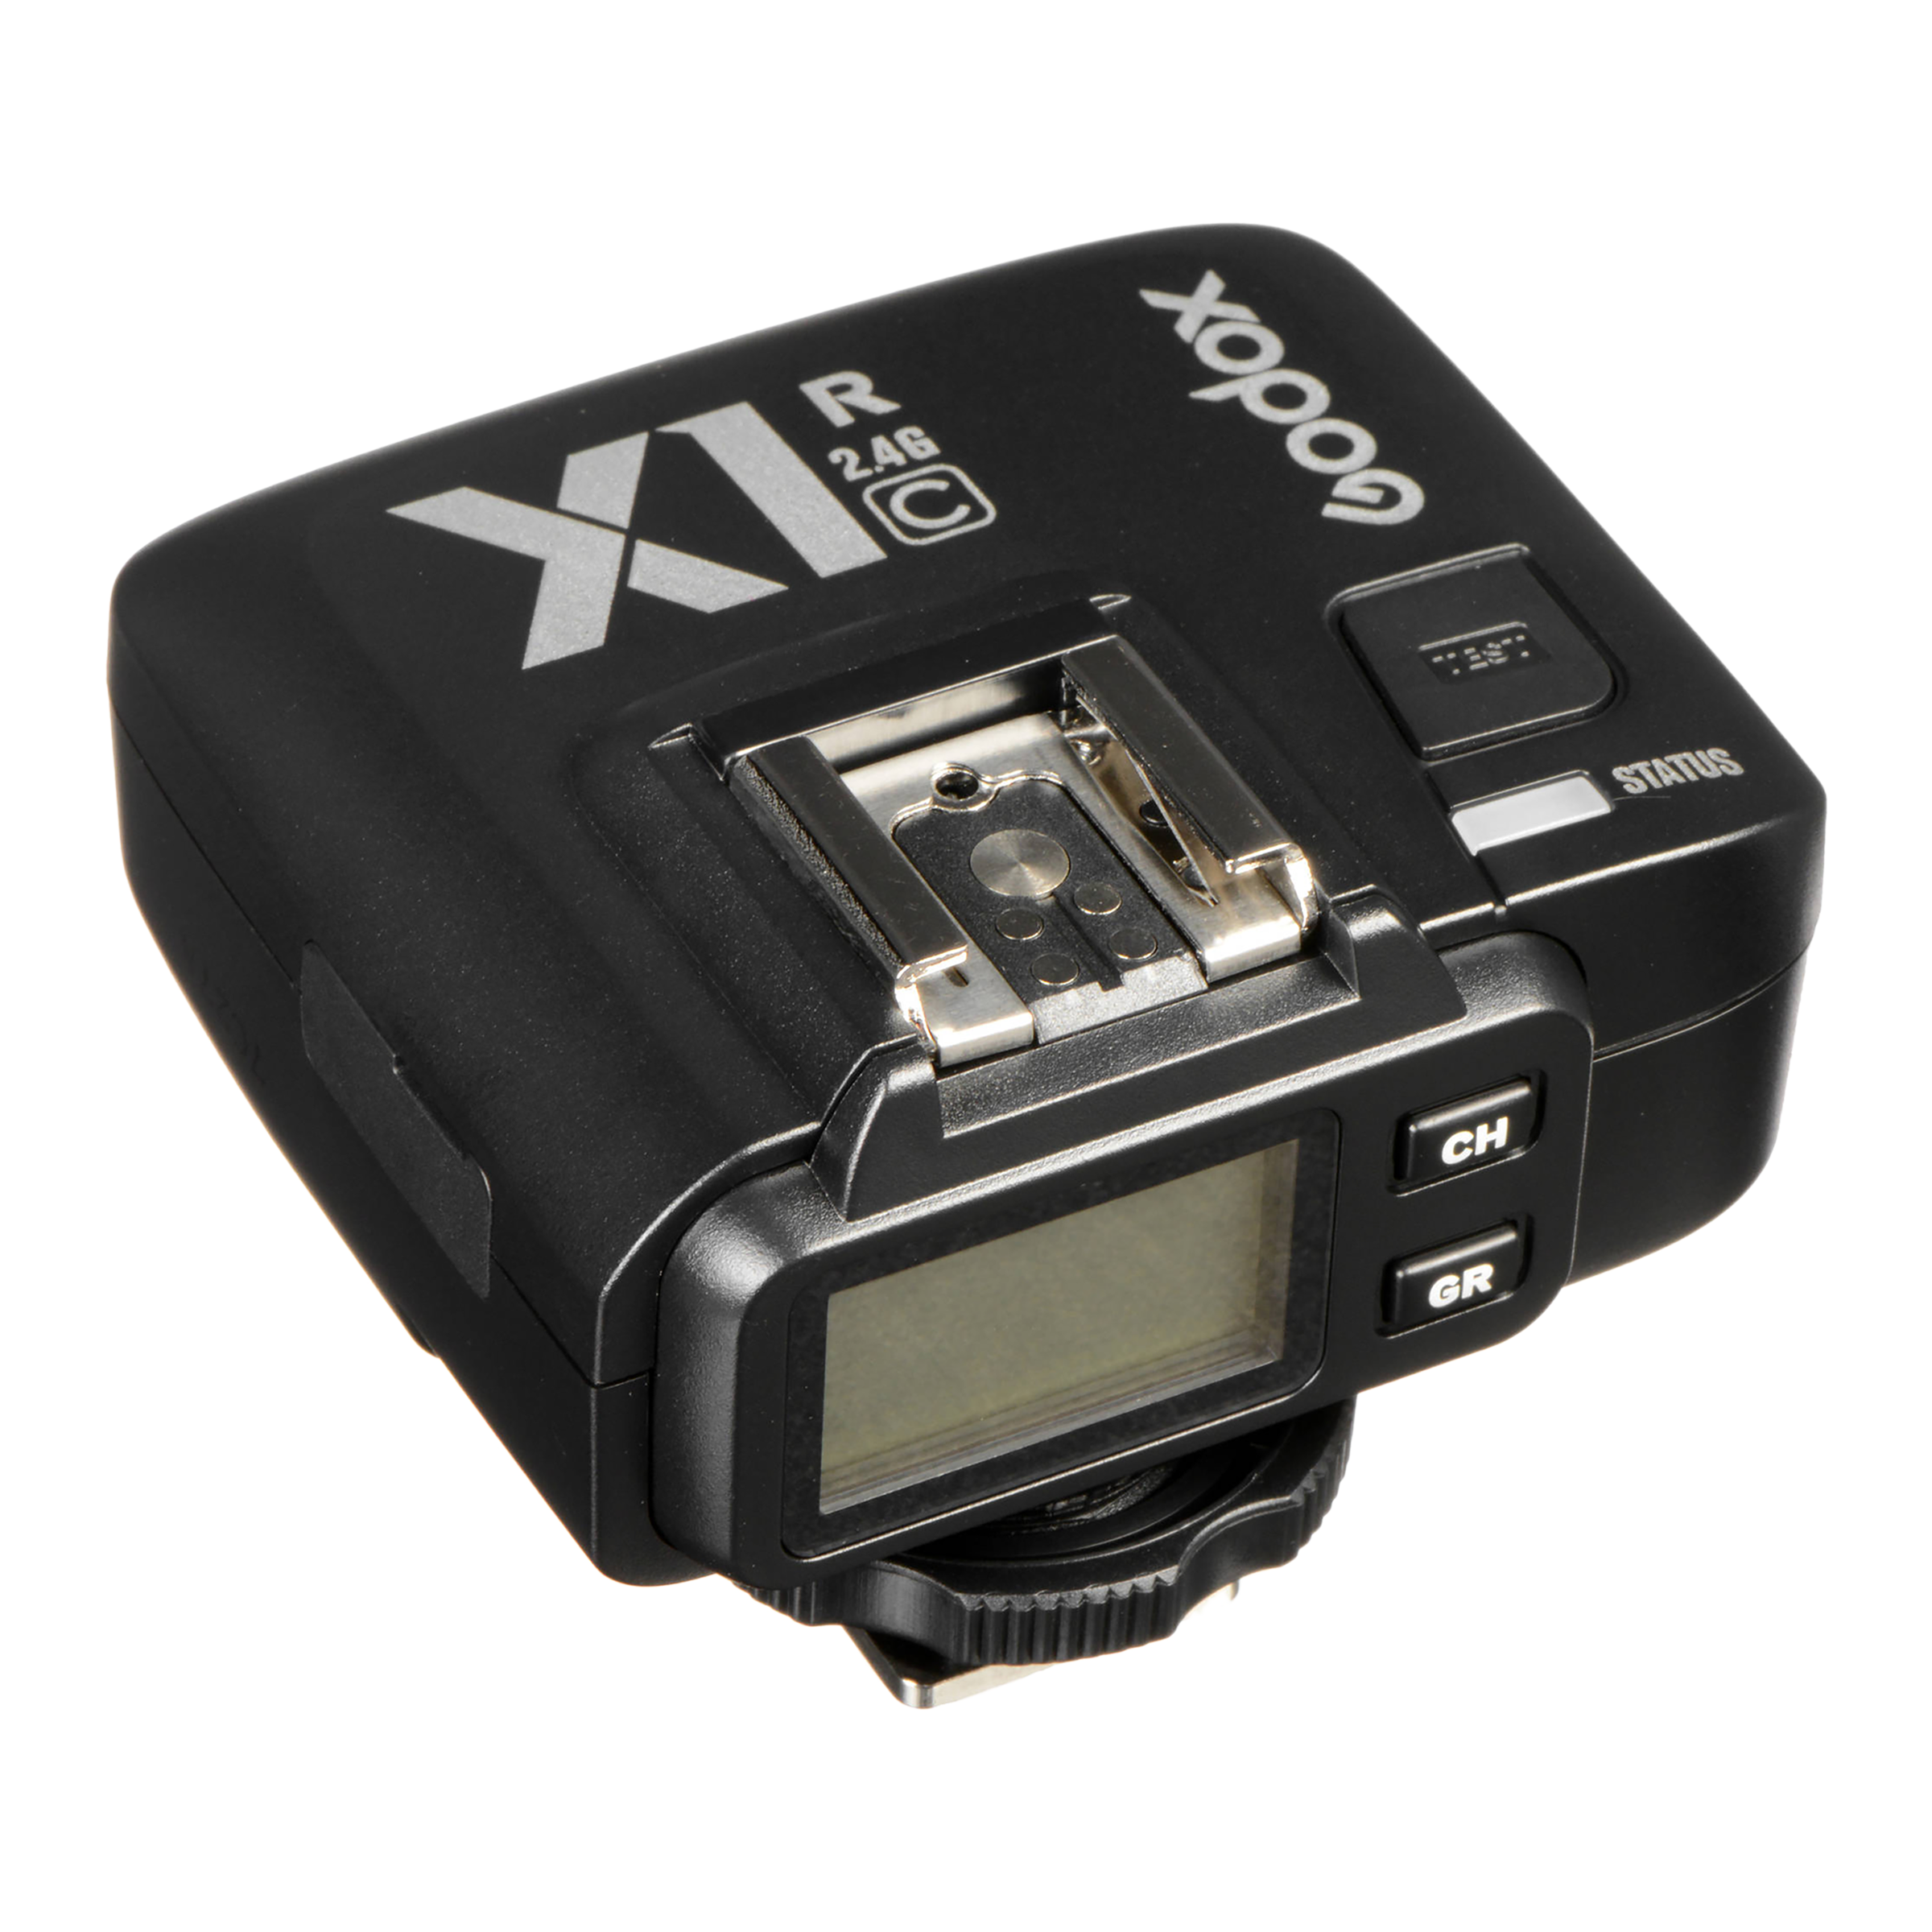 Godox X1R-C Wireless Flash Trigger for Canon EOS Series (TTL Functions Support)